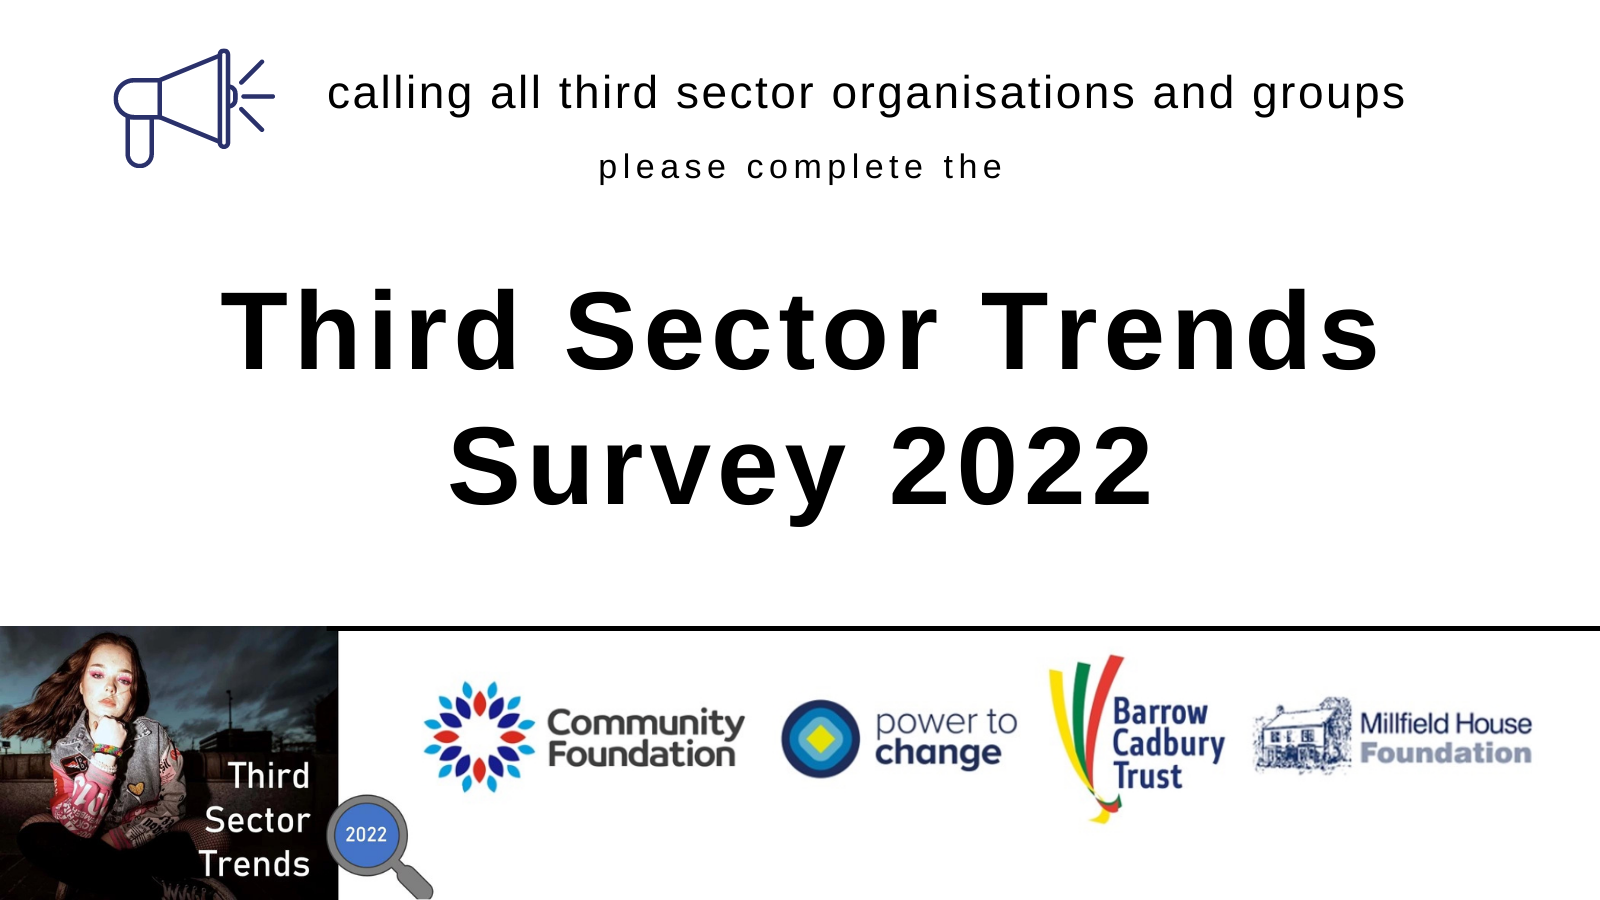 graphic asking all third sector organisations to complete the third sector trends survey